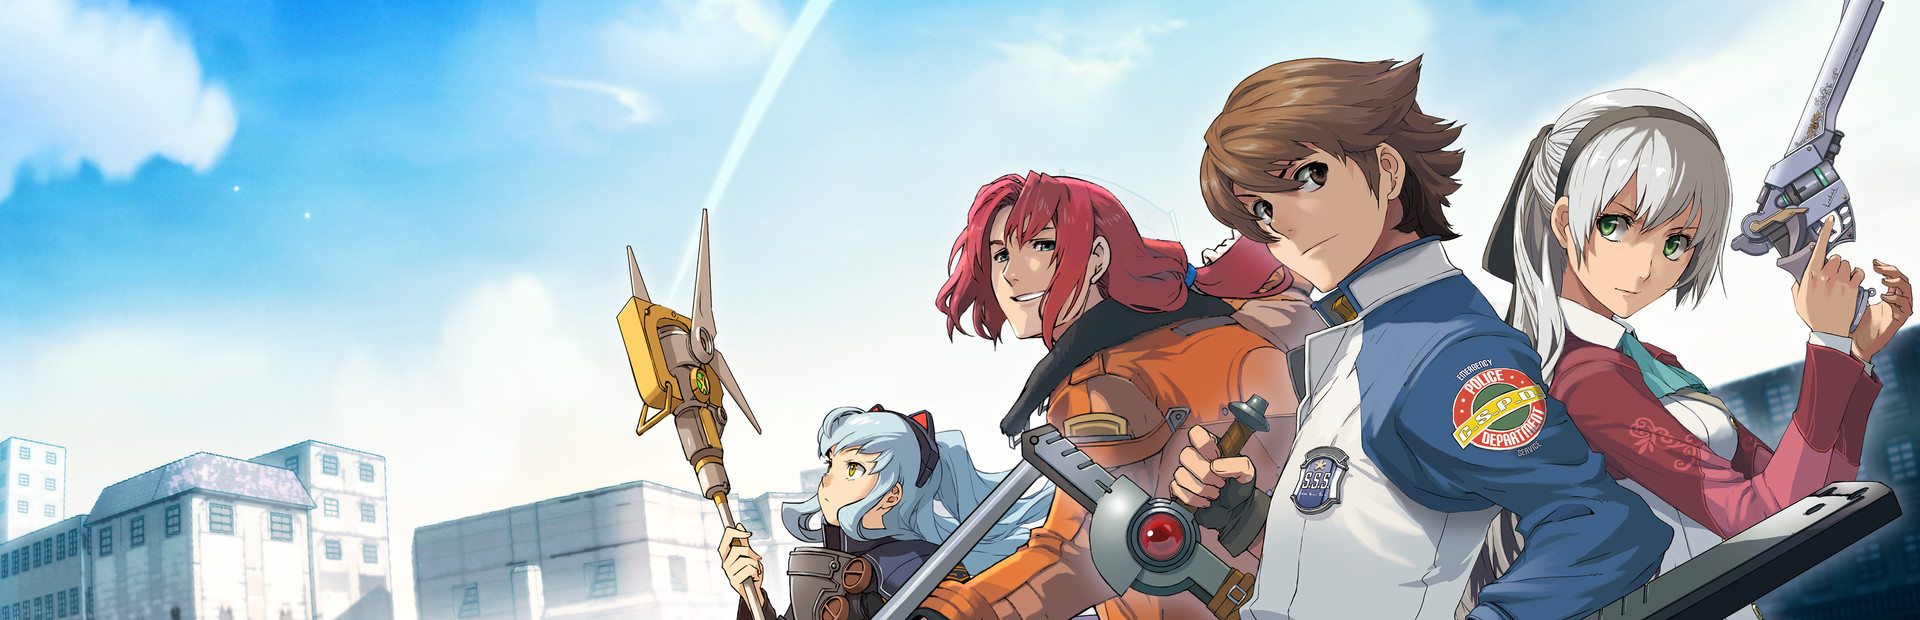 The Legend of Heroes: Trails from Zero cover image